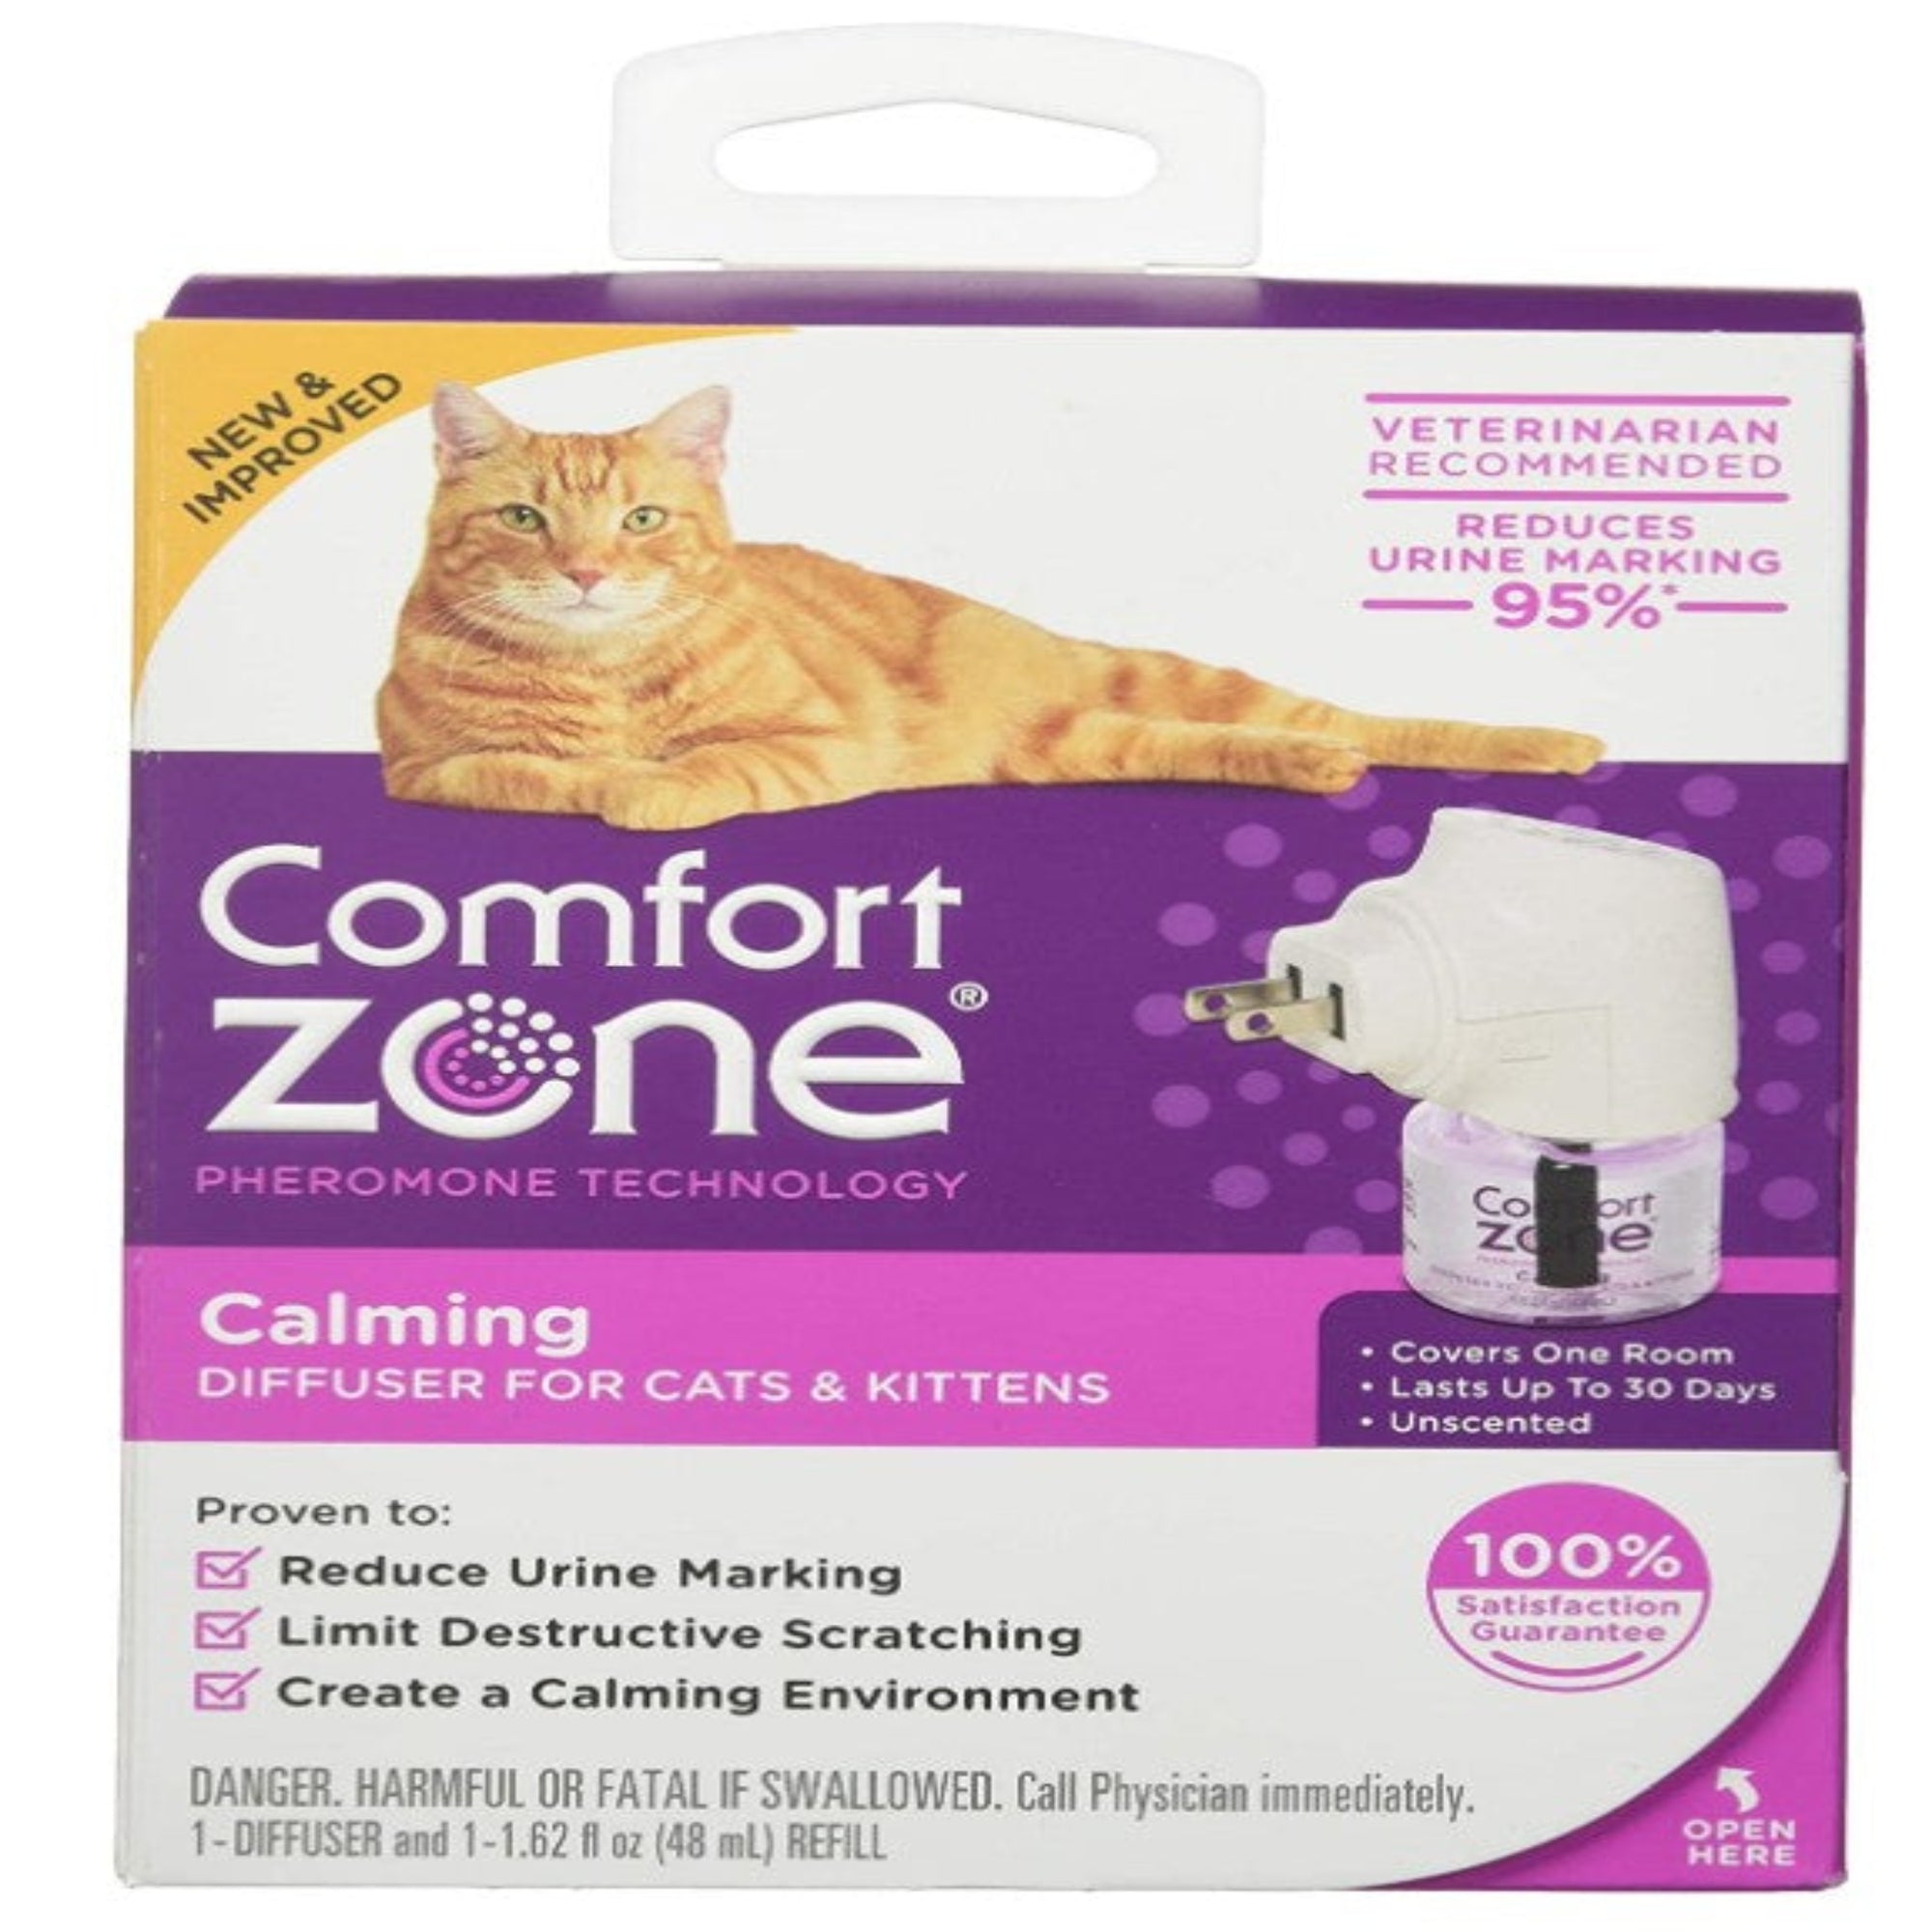 Comfort Zone Calming Diffuser Kit for Cats and Kittens